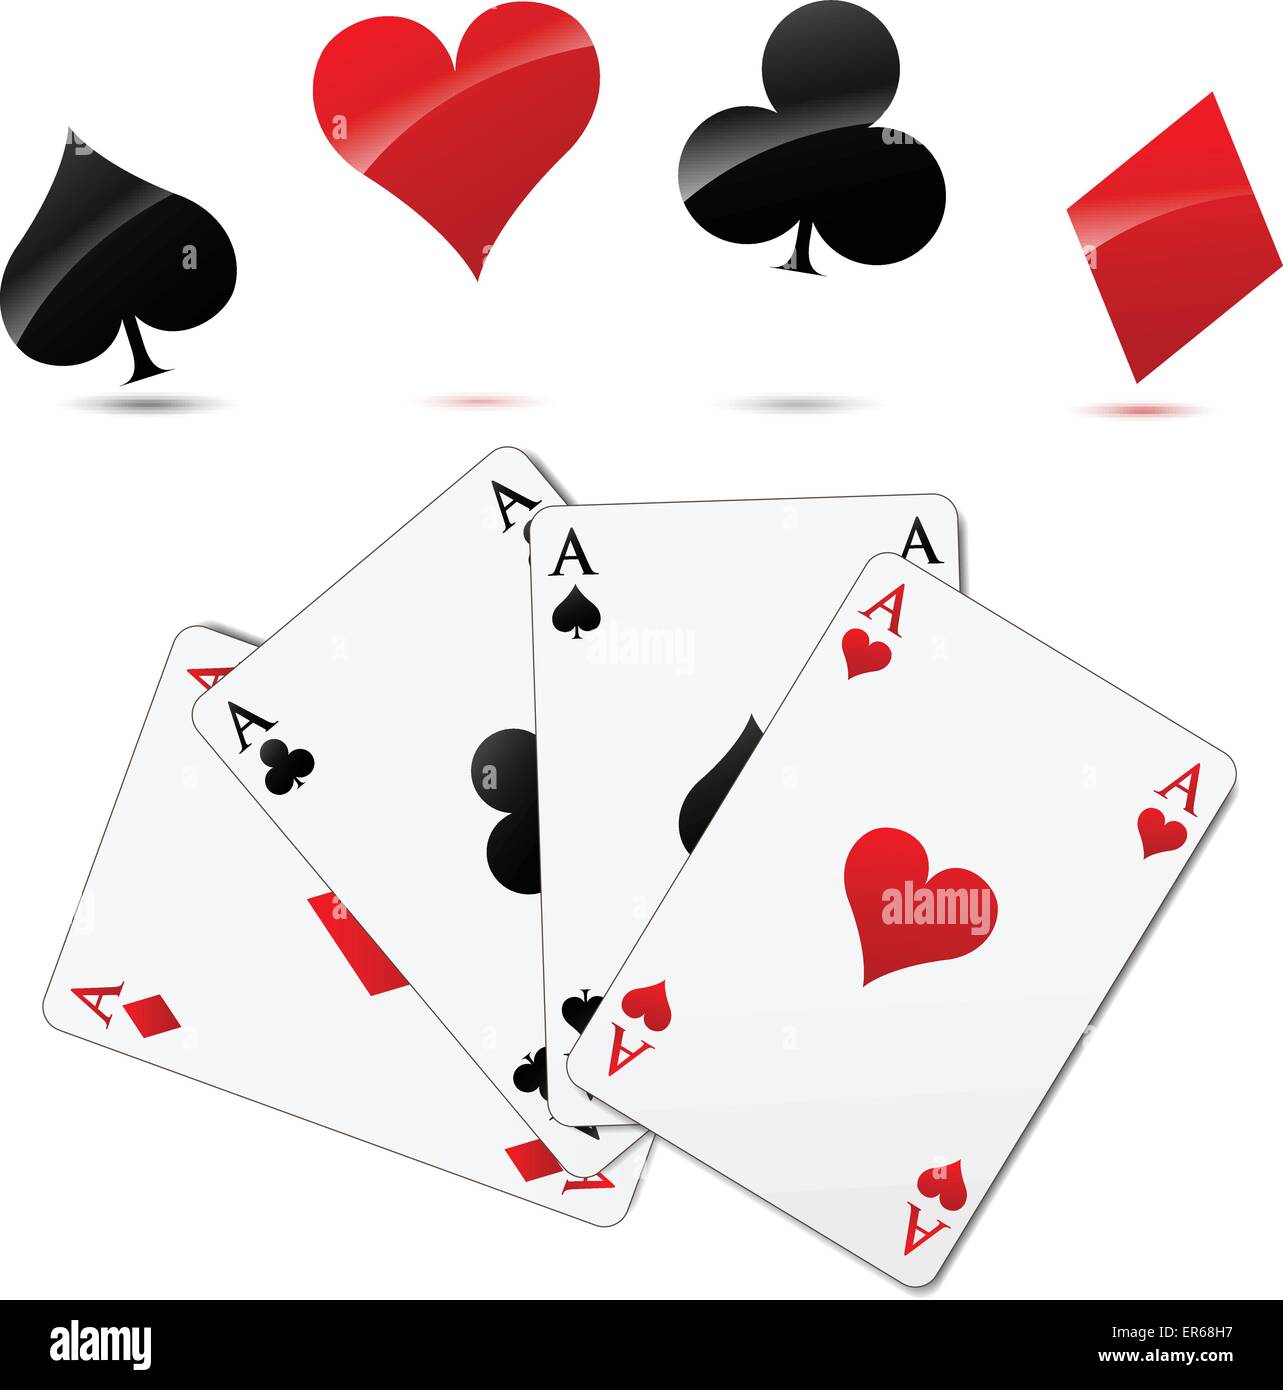 Vector illustration of casino cards elements set concept Stock Vector